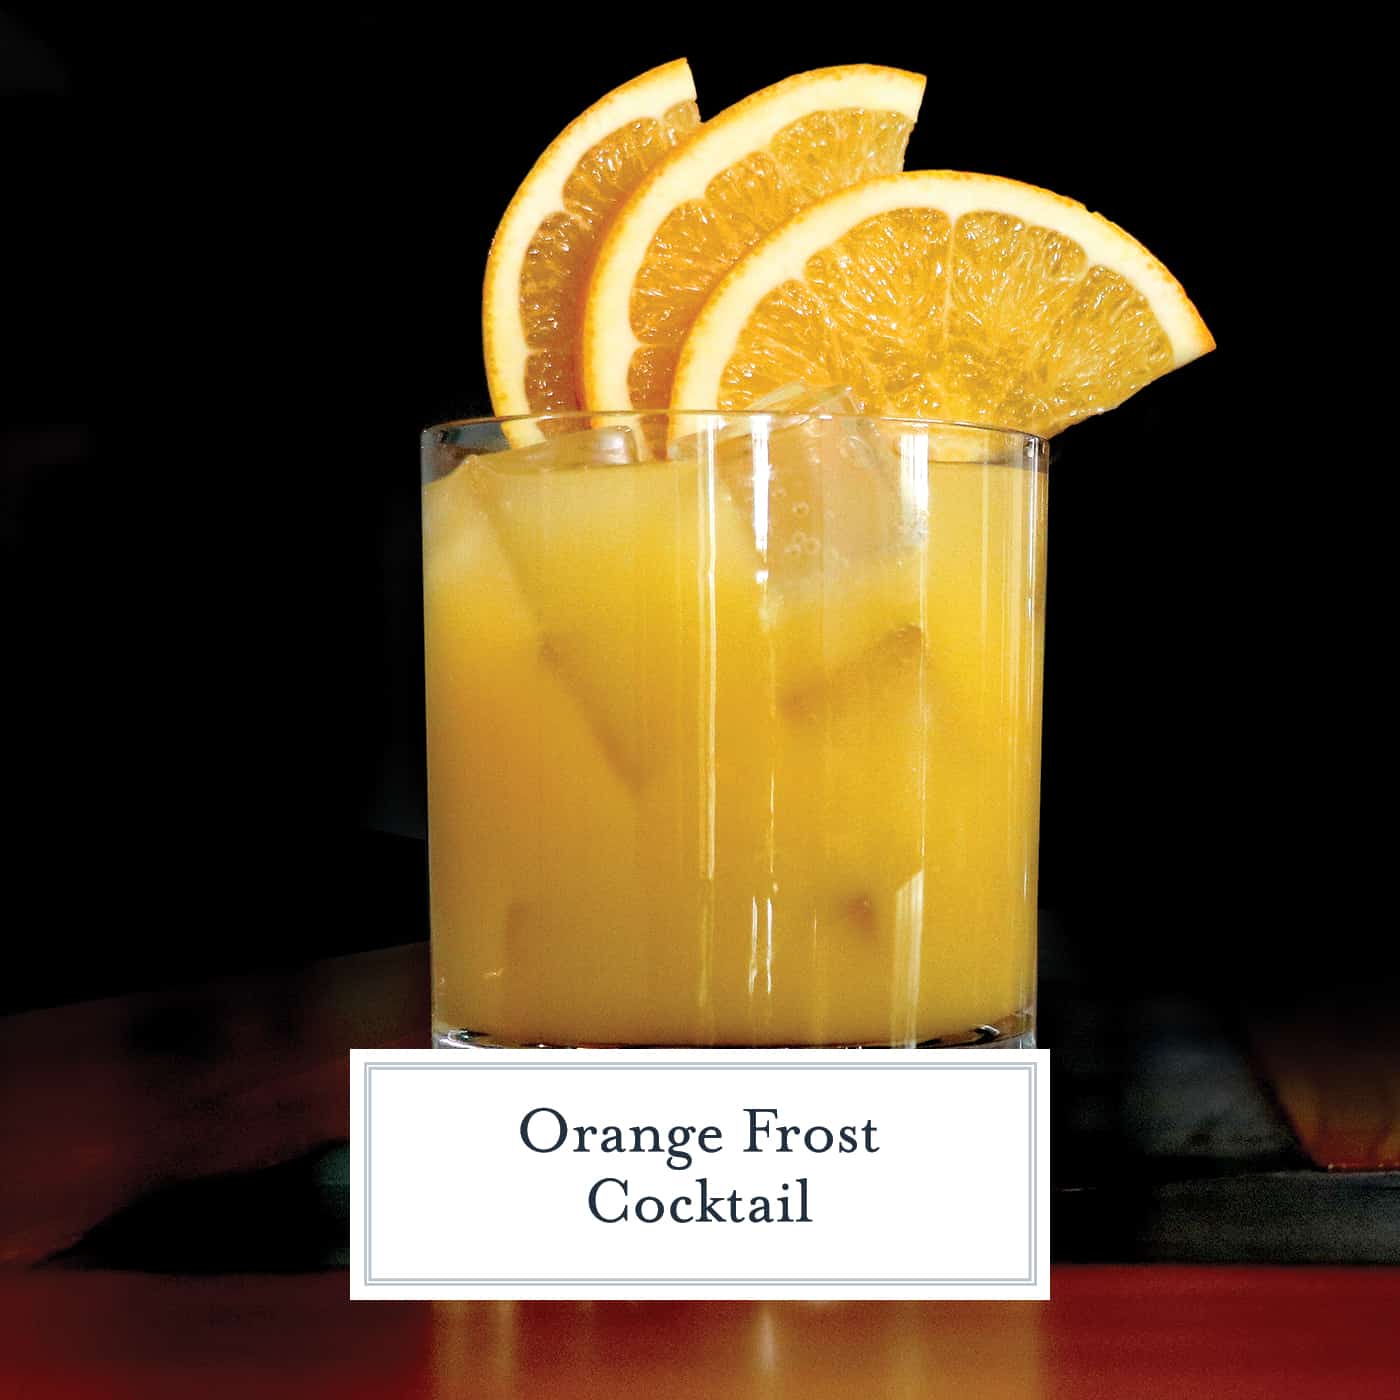 Orange Frost Cocktail is a refreshing and festive holiday cocktail using whiskey, lemon and orange juice and maple syrup. Make this your holiday party cocktail! #whiskeycocktails www.savoryexperiments.com 